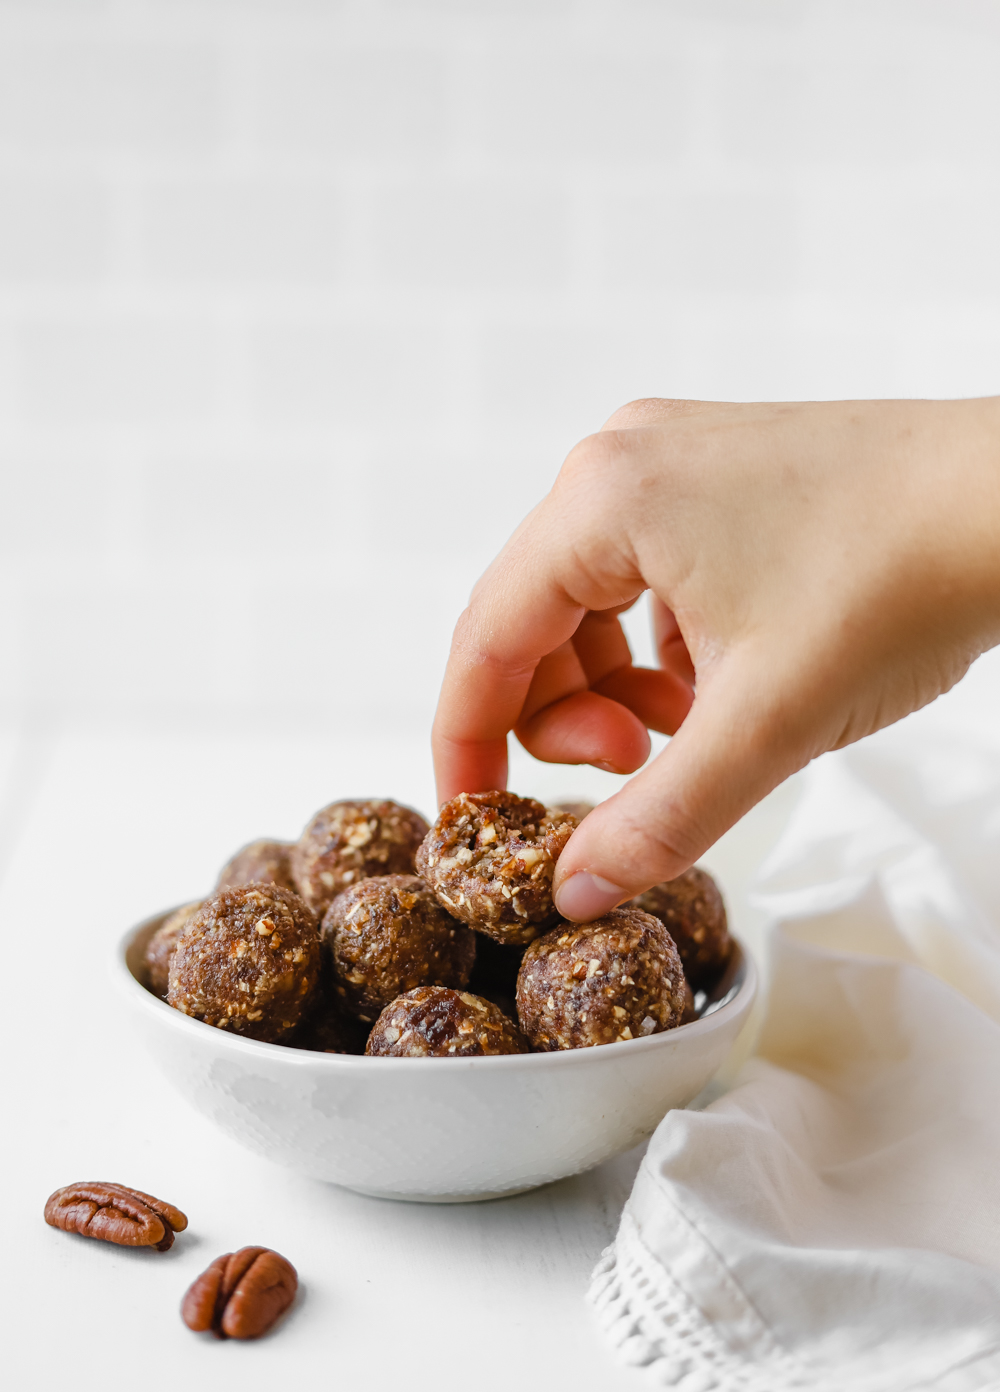 Hand grabbing a pecan pie bliss ball from a small white bowl.